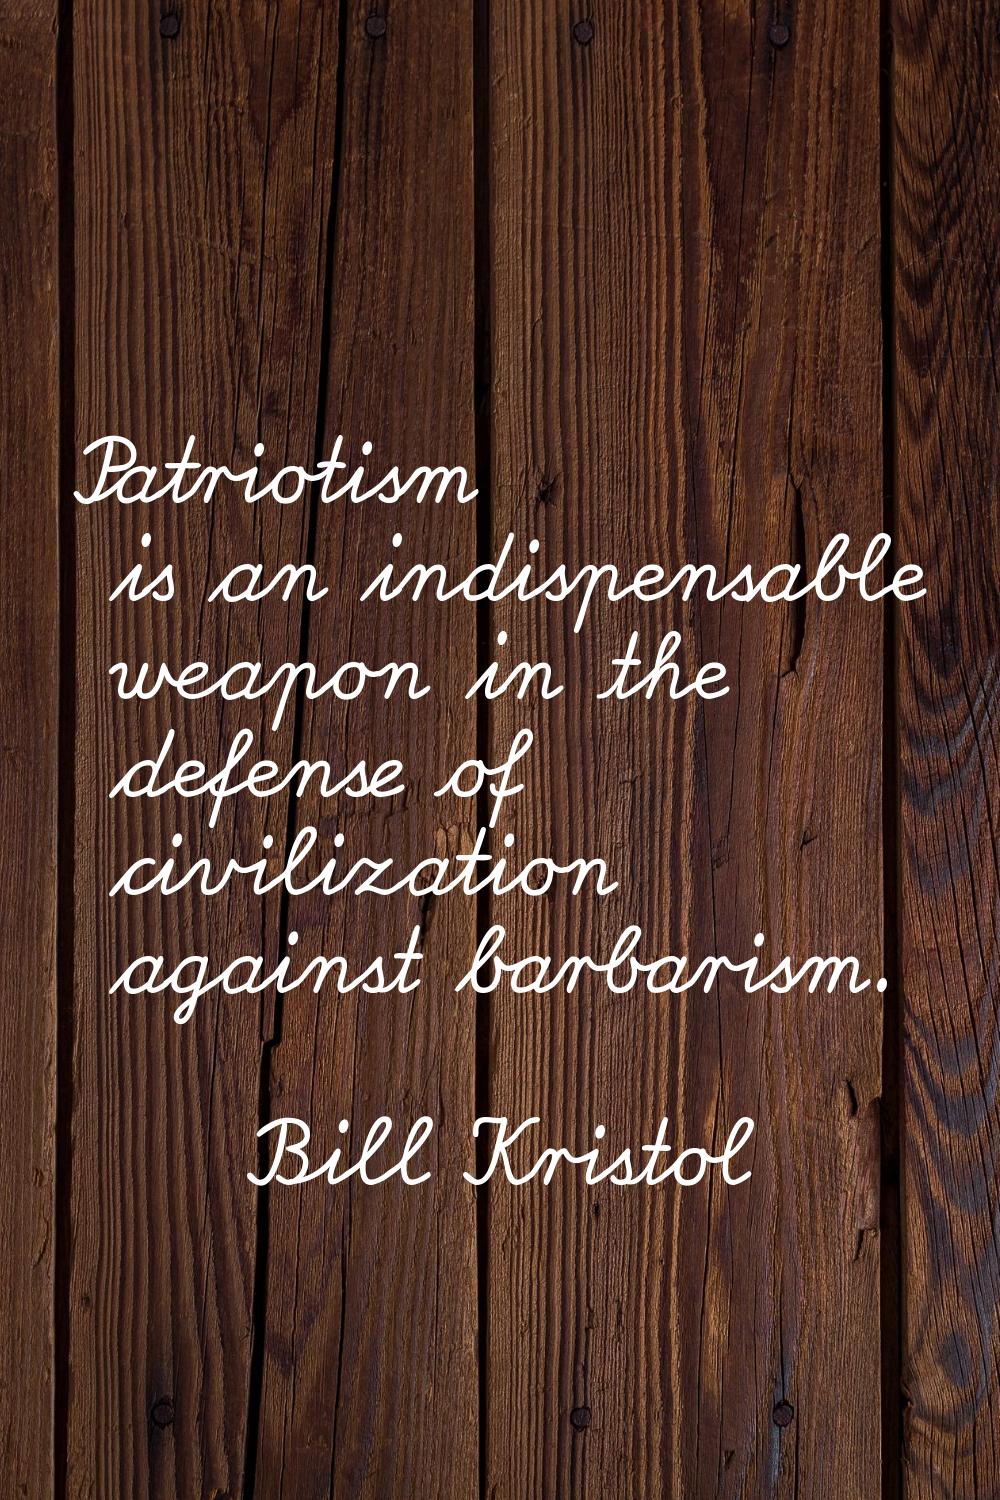 Patriotism is an indispensable weapon in the defense of civilization against barbarism.